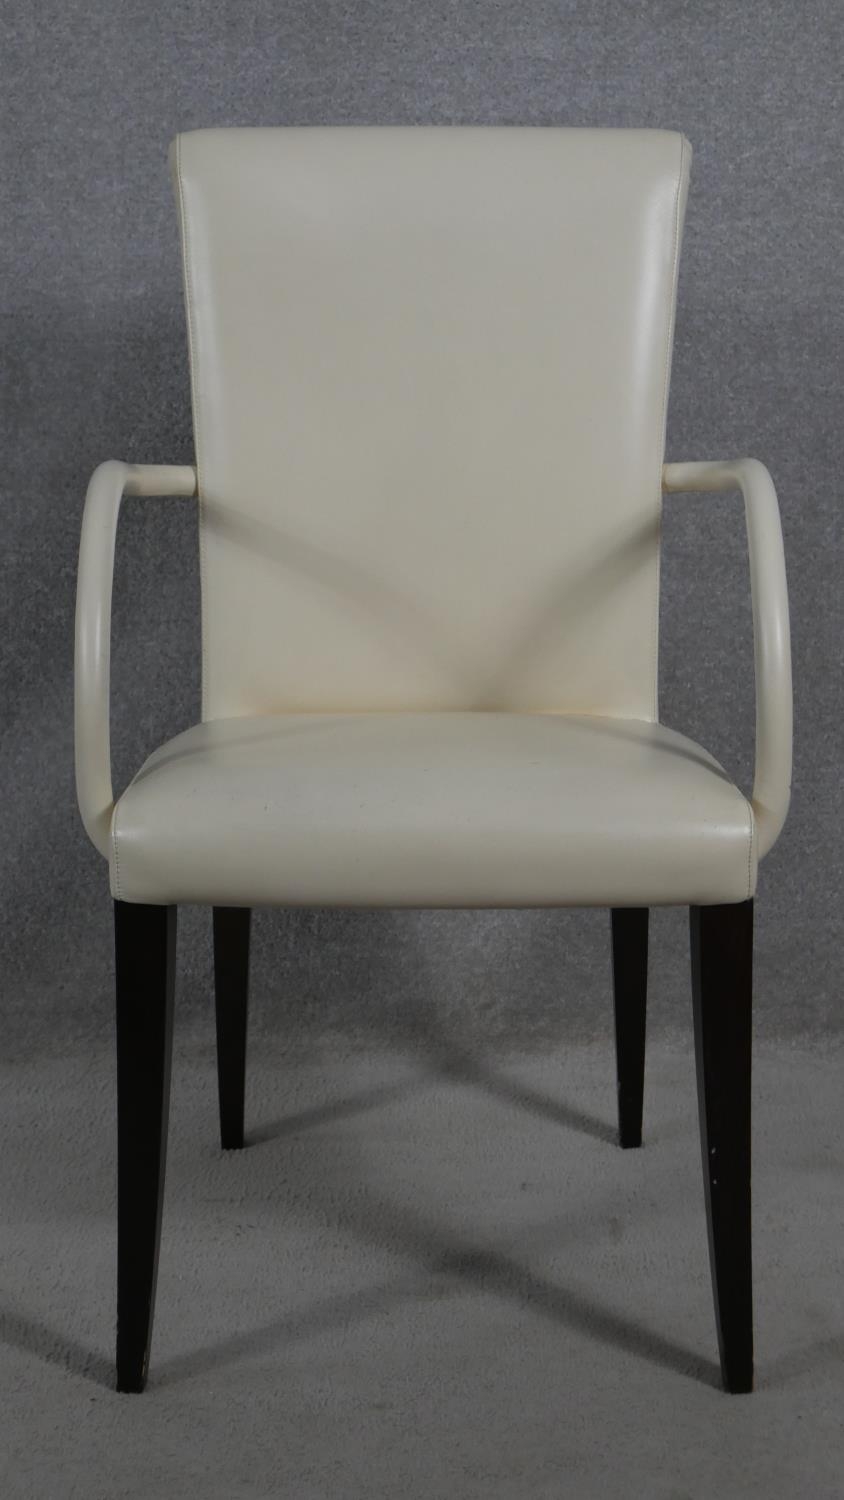 A set of seven contemporary Poltrona Frau Vittoria model dining armchairs in leather upholstery on - Image 2 of 5